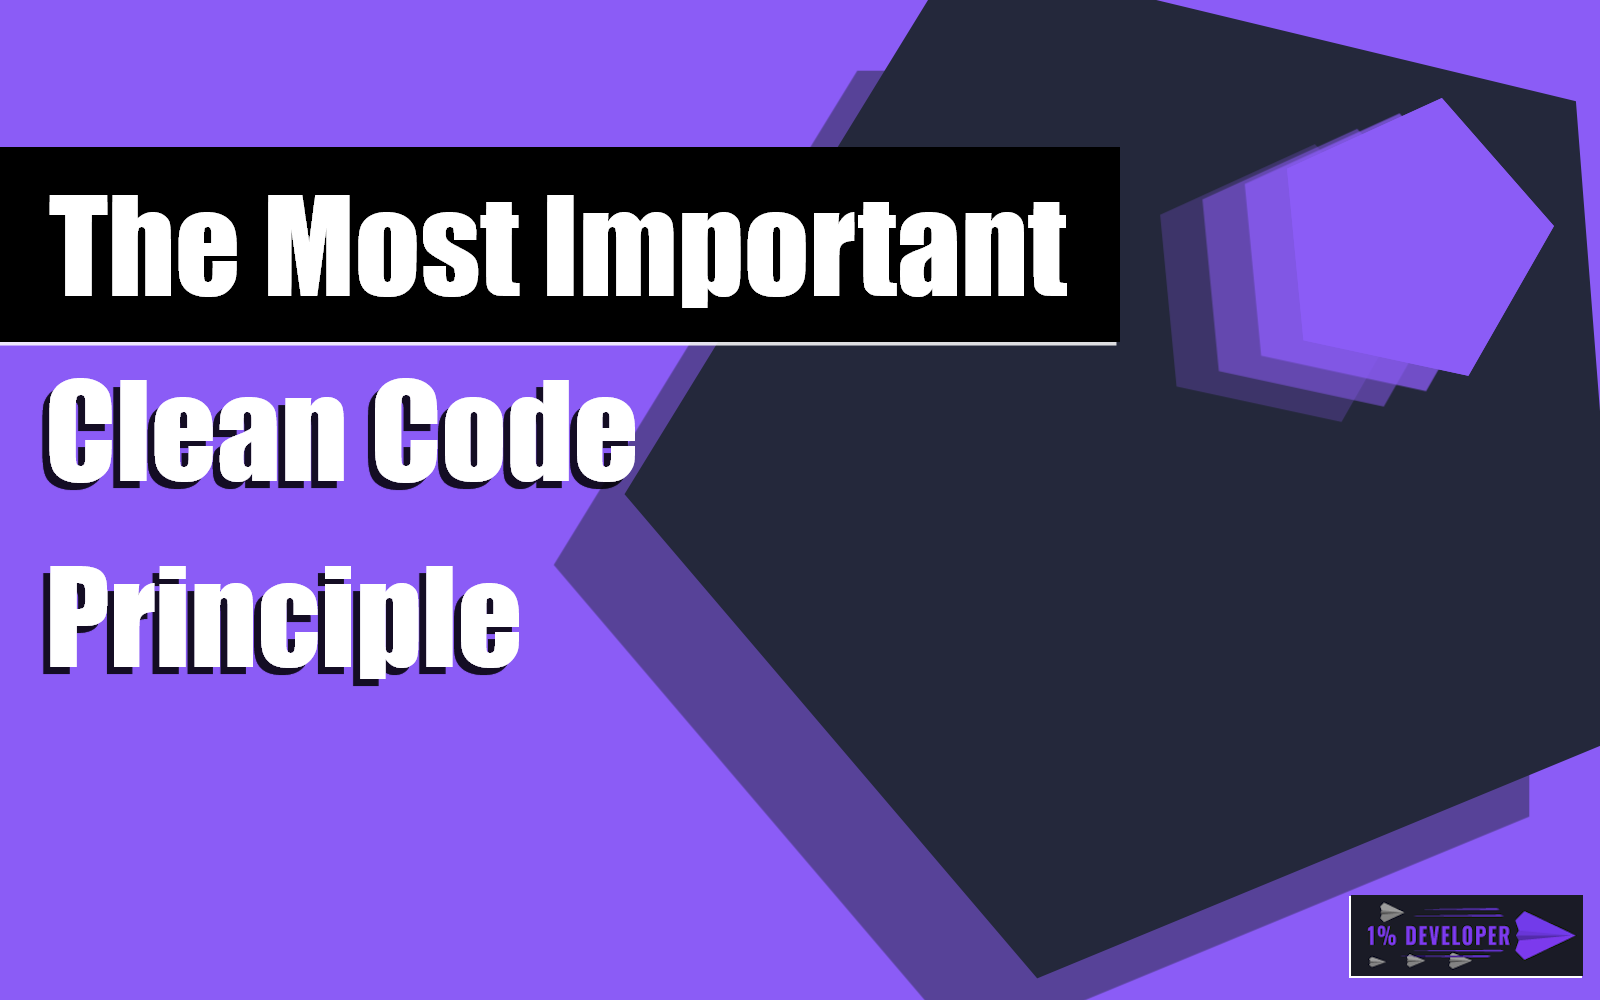 The Most Important Clean Code Principle